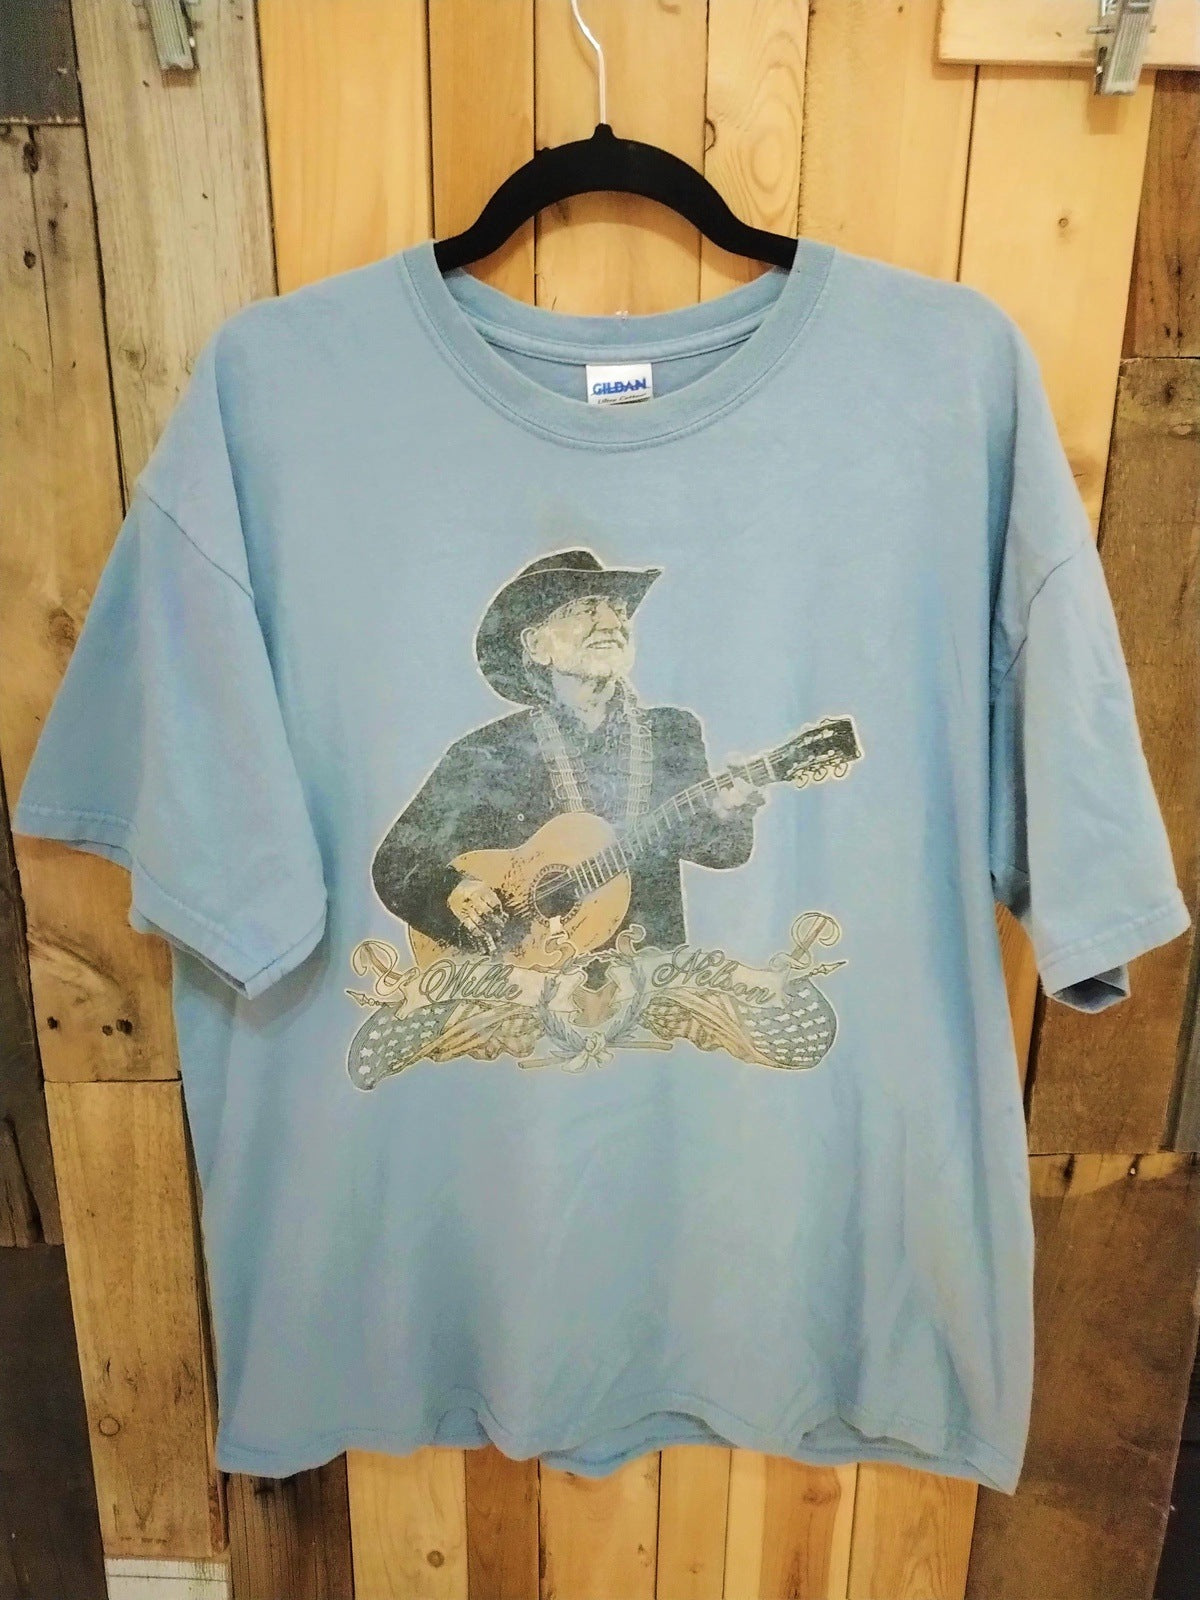 Willie Nelson "Willie's Place" T Shirt Size XL 378712WH